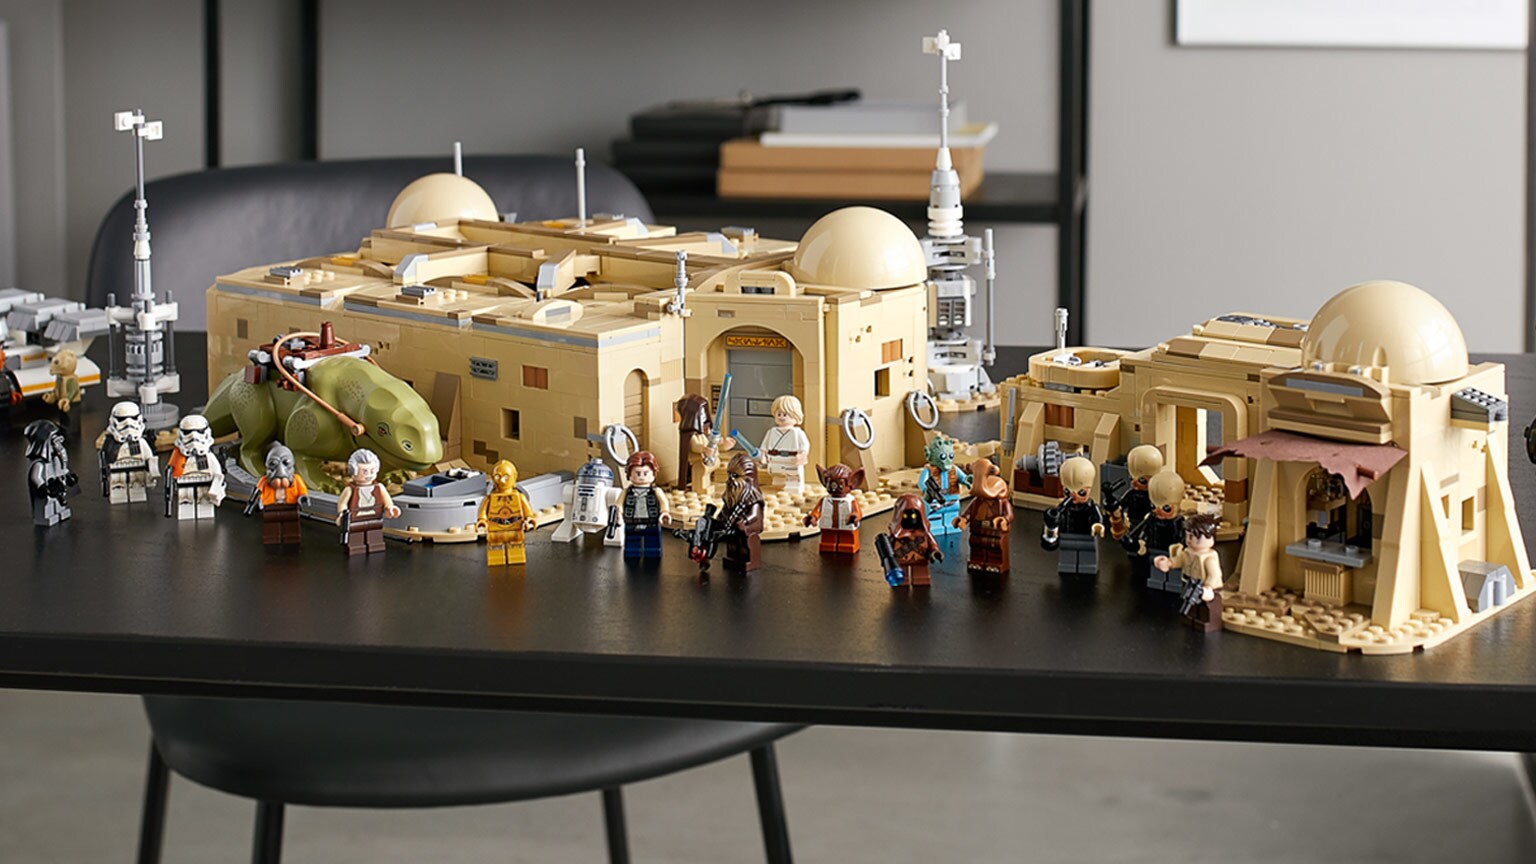 New LEGO Star Wars Mos Eisley Cantina is a Wretched Hive of Villainy - and It's Glorious | StarWars.com